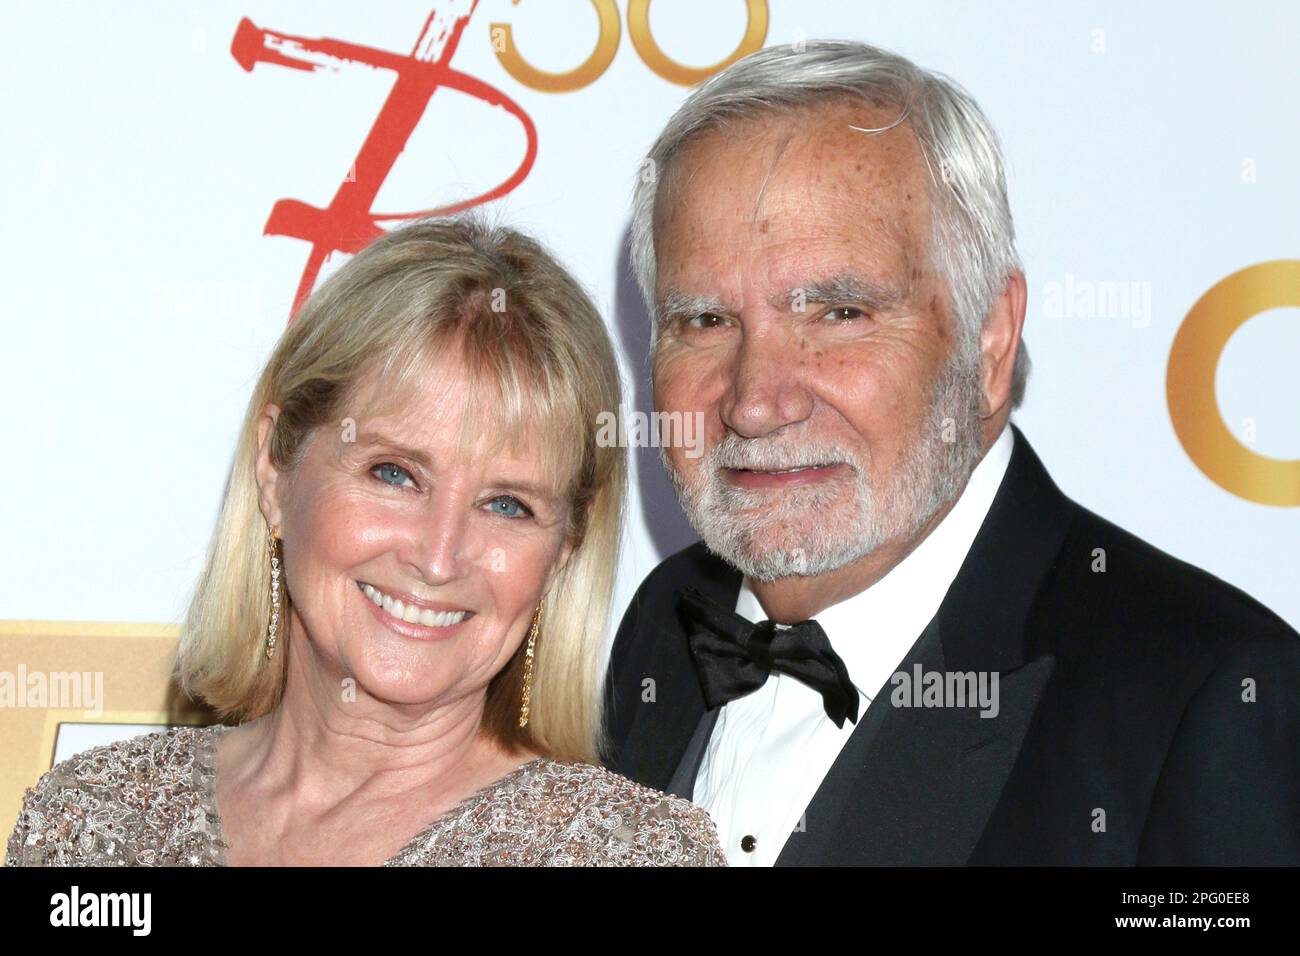 LOS ANGELES - MAR 17:  Laurette Spang-McCook. John McCook at the 50th Anniversary of The Young and The Restless at the Vibiana on March 17, 2023 in Los Angeles, CA Stock Photo